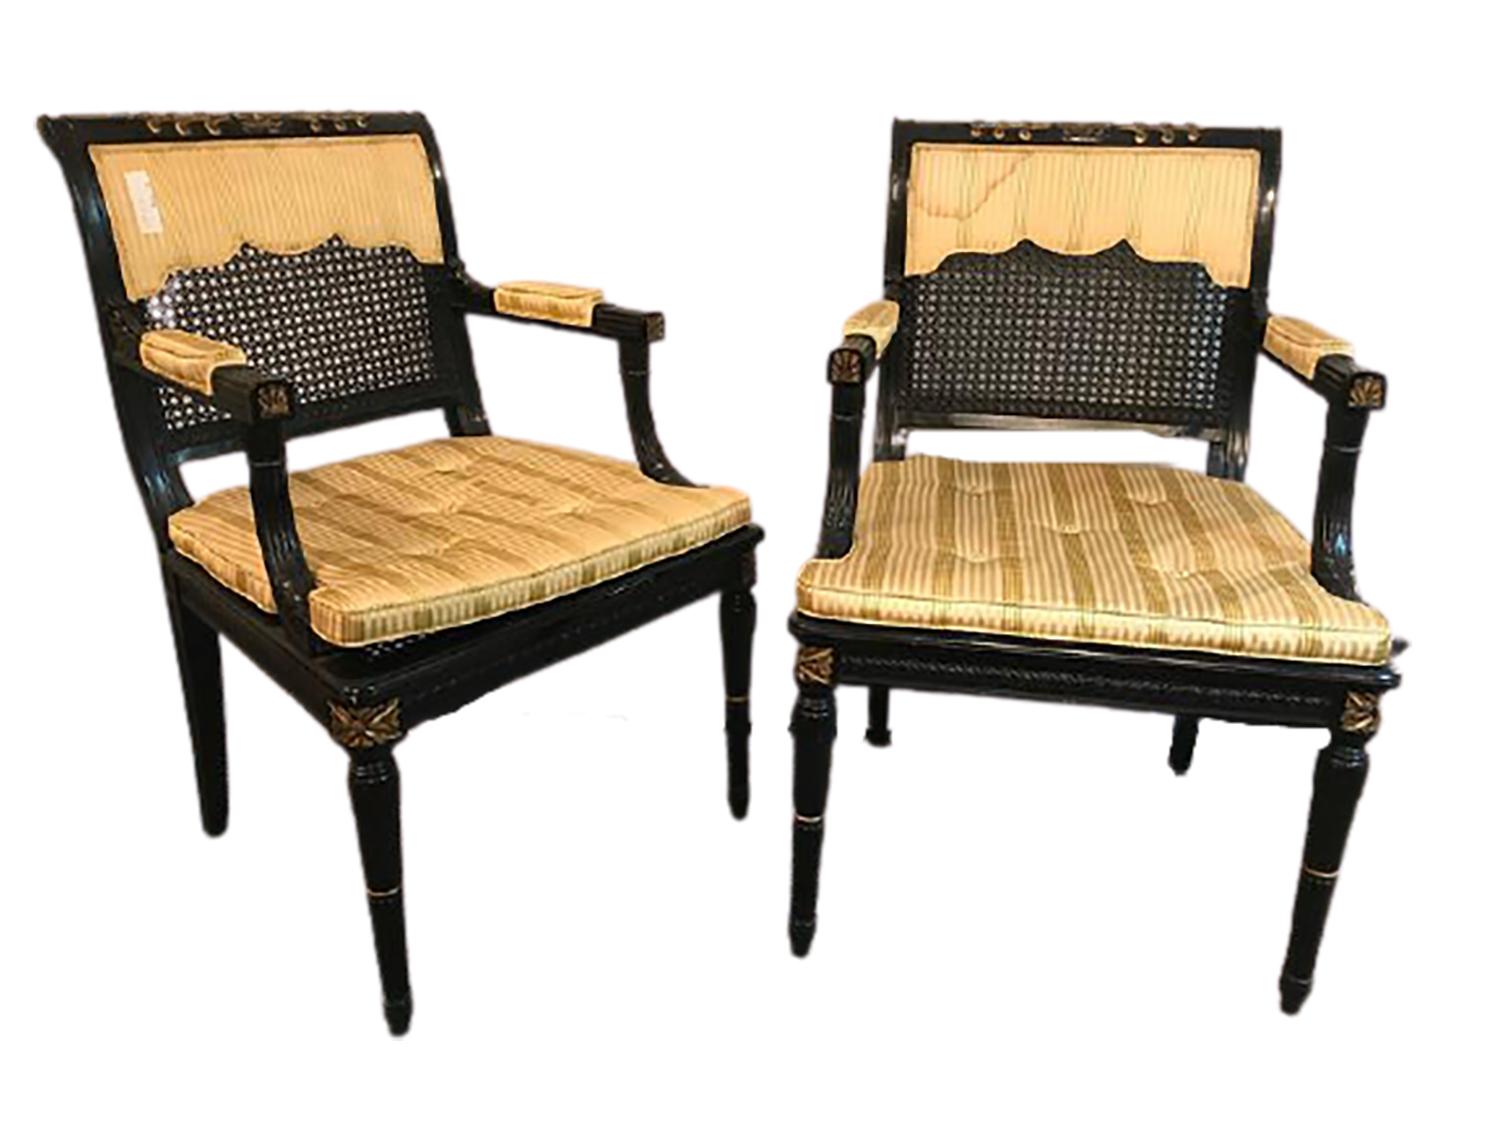 Pair of black and gold cane back armchairs, Fauteuils attributed Maison Jansen. Each ebonized frame with fine gold decorative high lights. The pair having cushion seats with drapery half covered back rests (one with a slight stain pictured) with